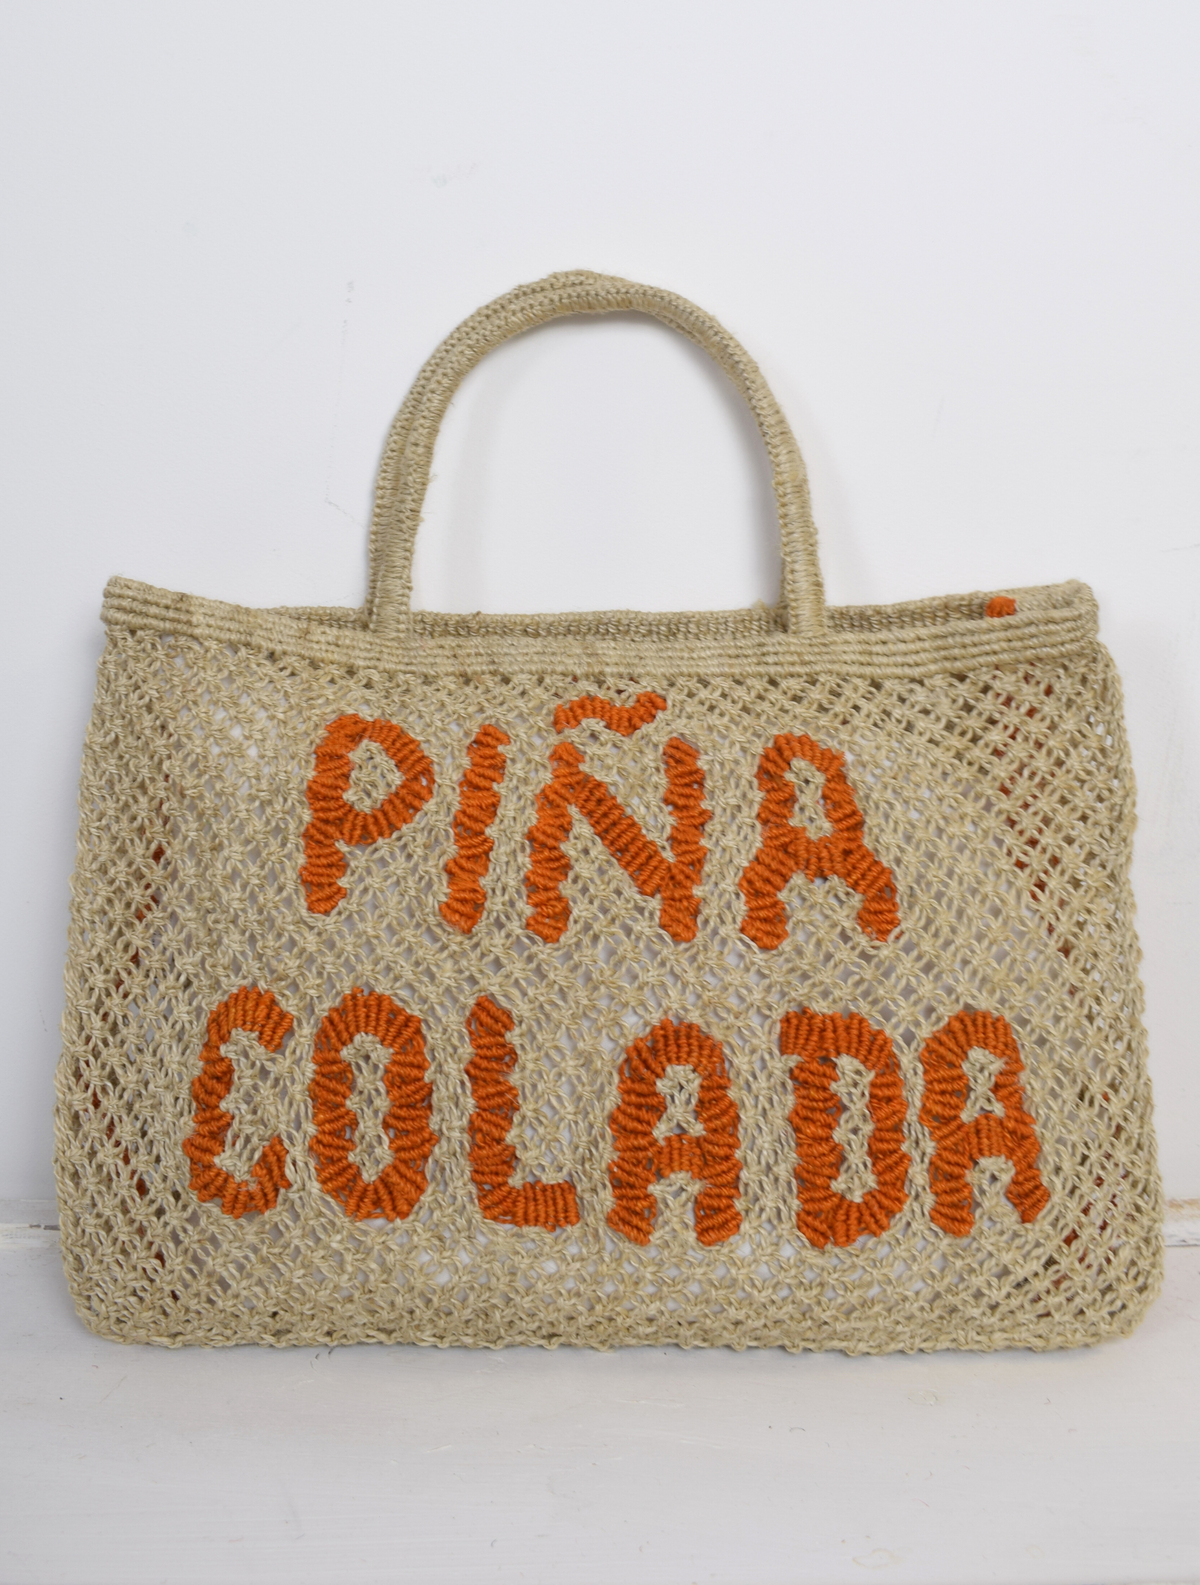 Woven nautral bag with pina colada writen on it in orange 